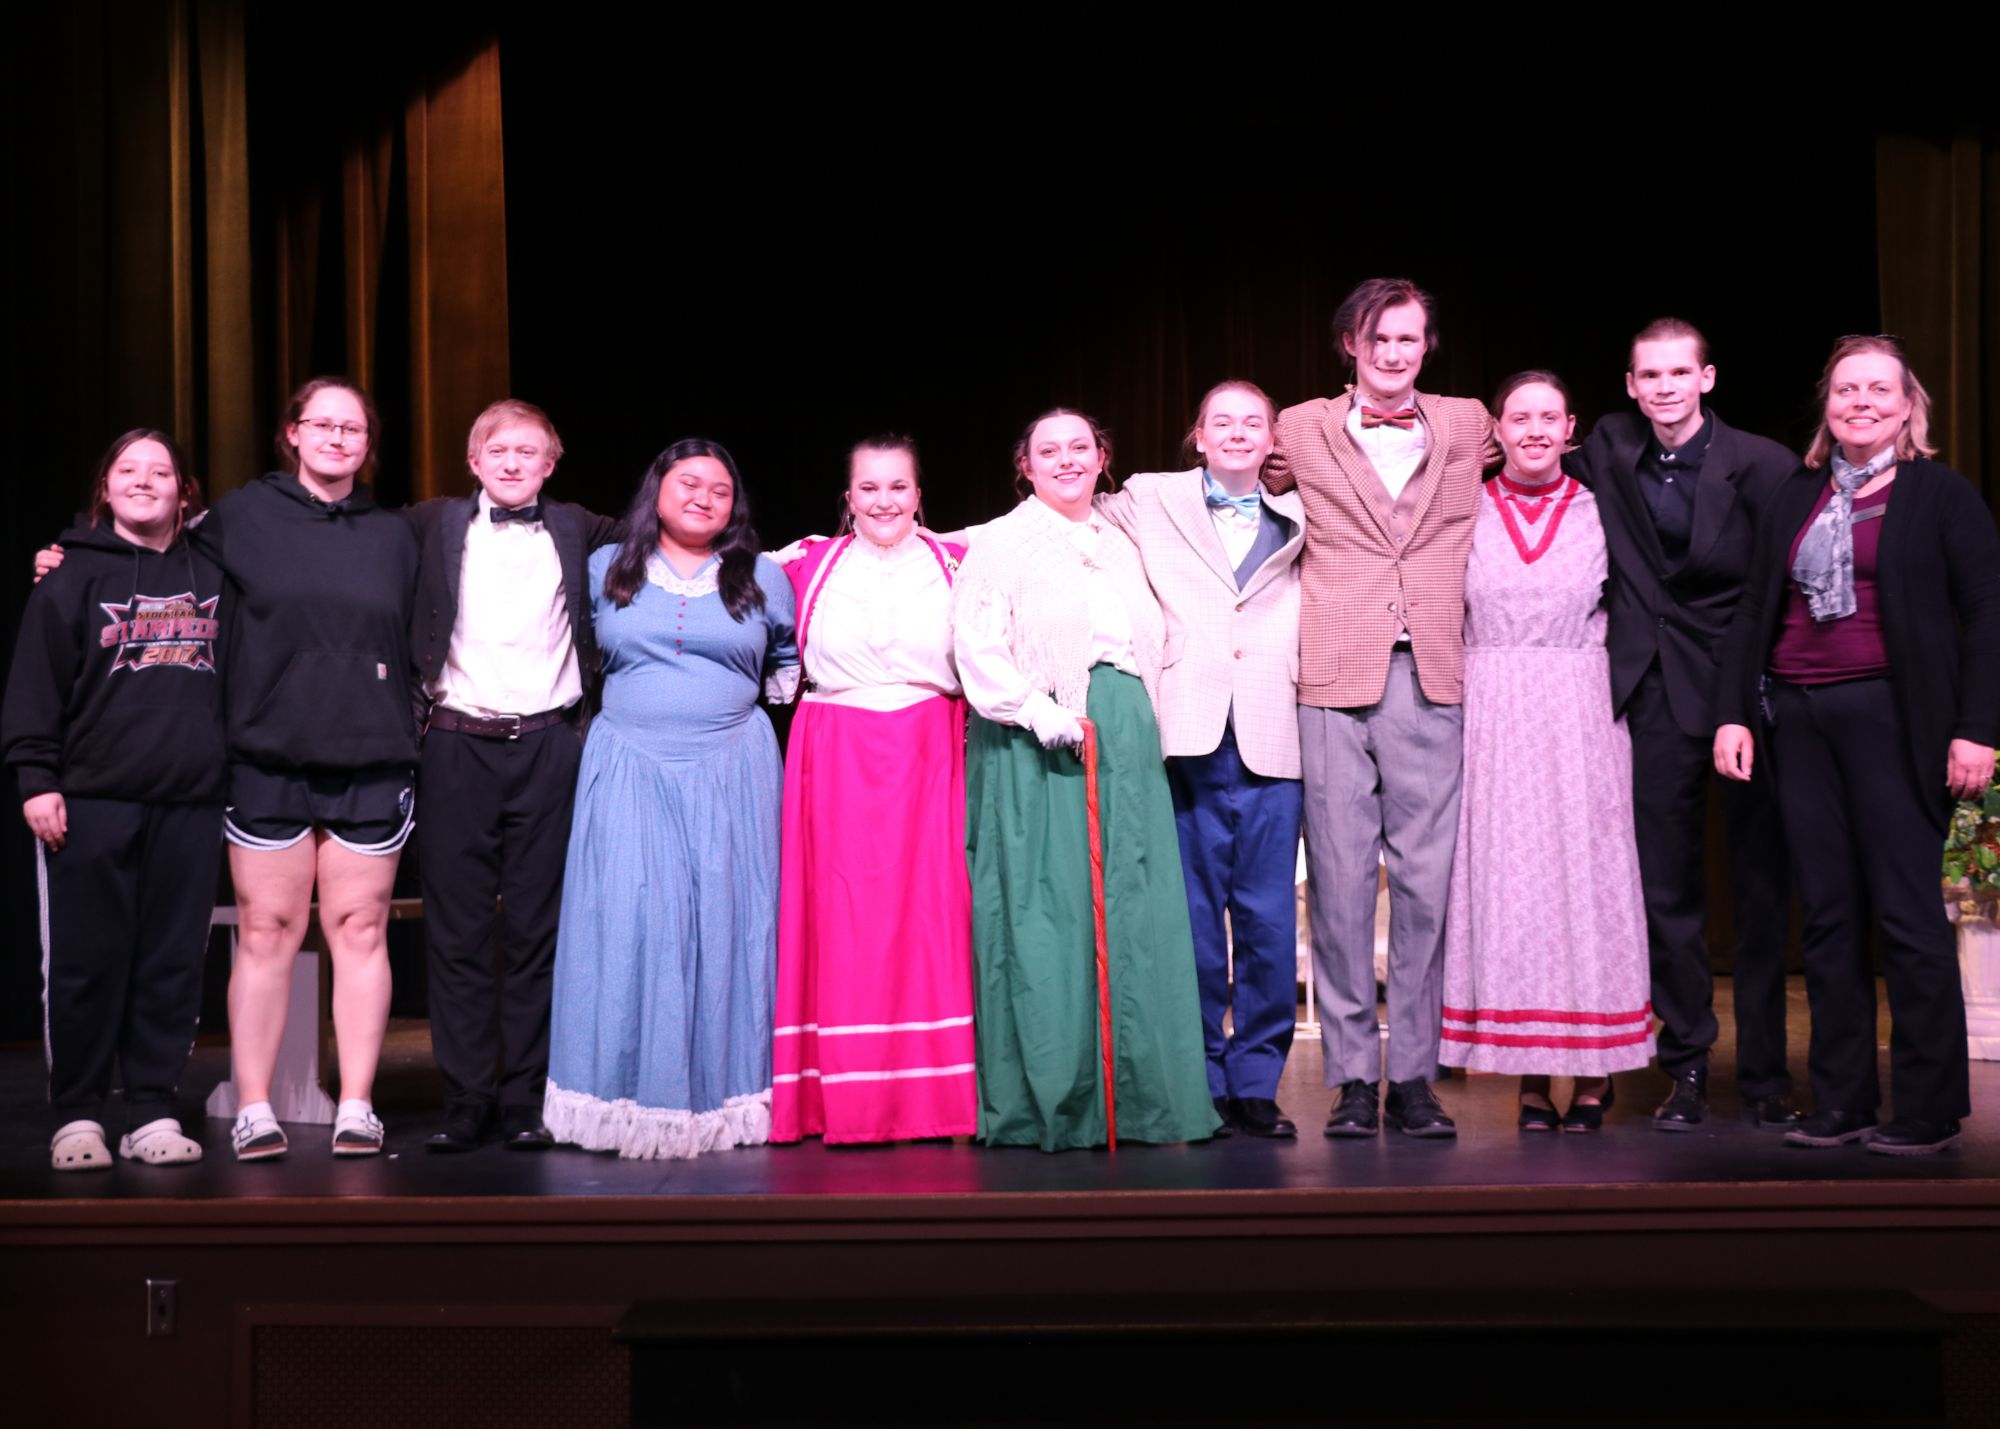 "The Importance of Being Earnest" Cast